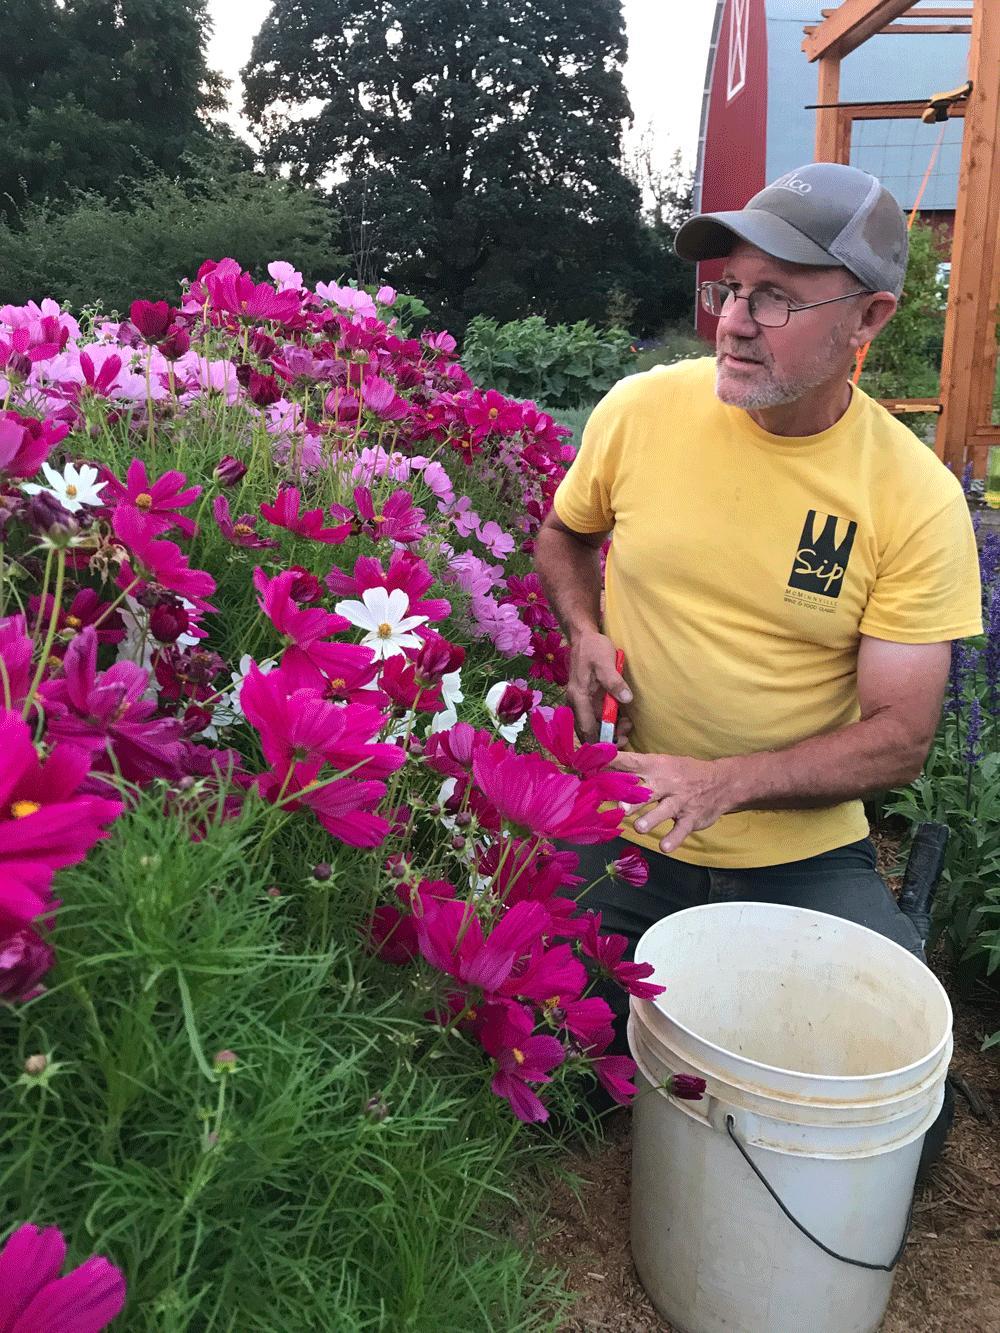 Michael O’Loughlin uses garden shears to remove faded or dead flowers from pollinator plants growing on the family farm.